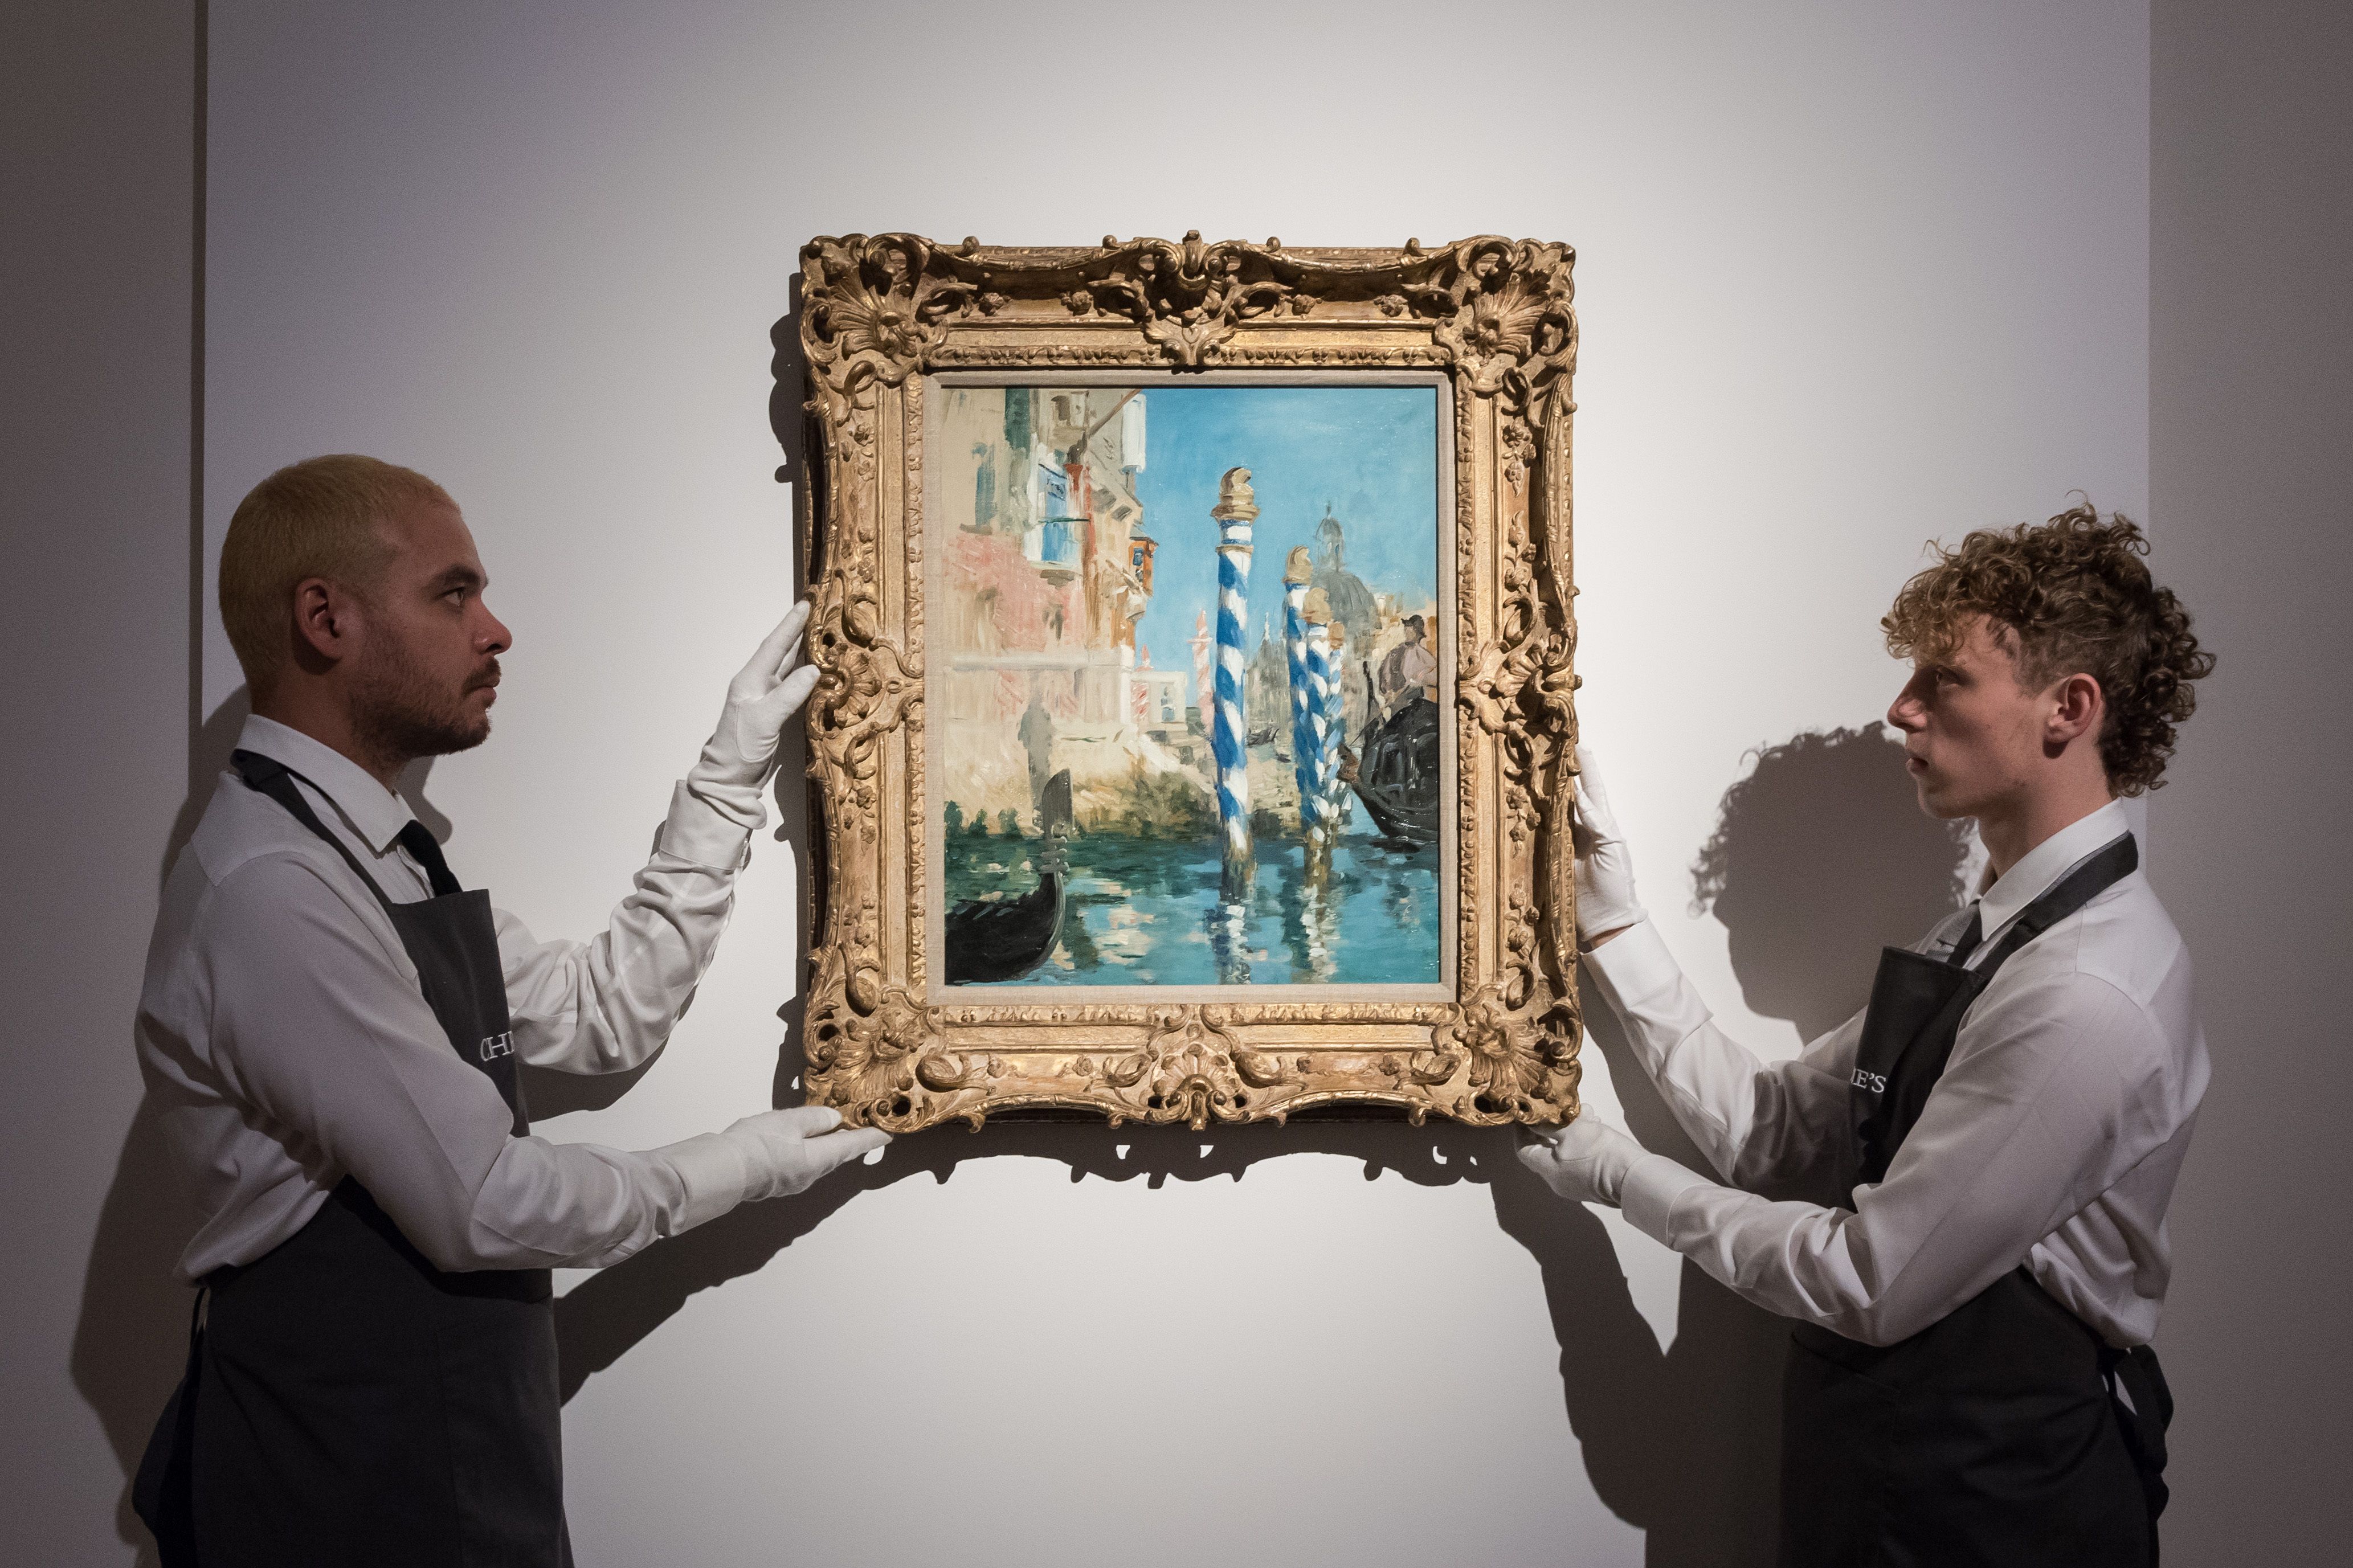 Art handlers hold a painting titled 'Le Grand Canal a Venise' by Edouard Manet on display in London.